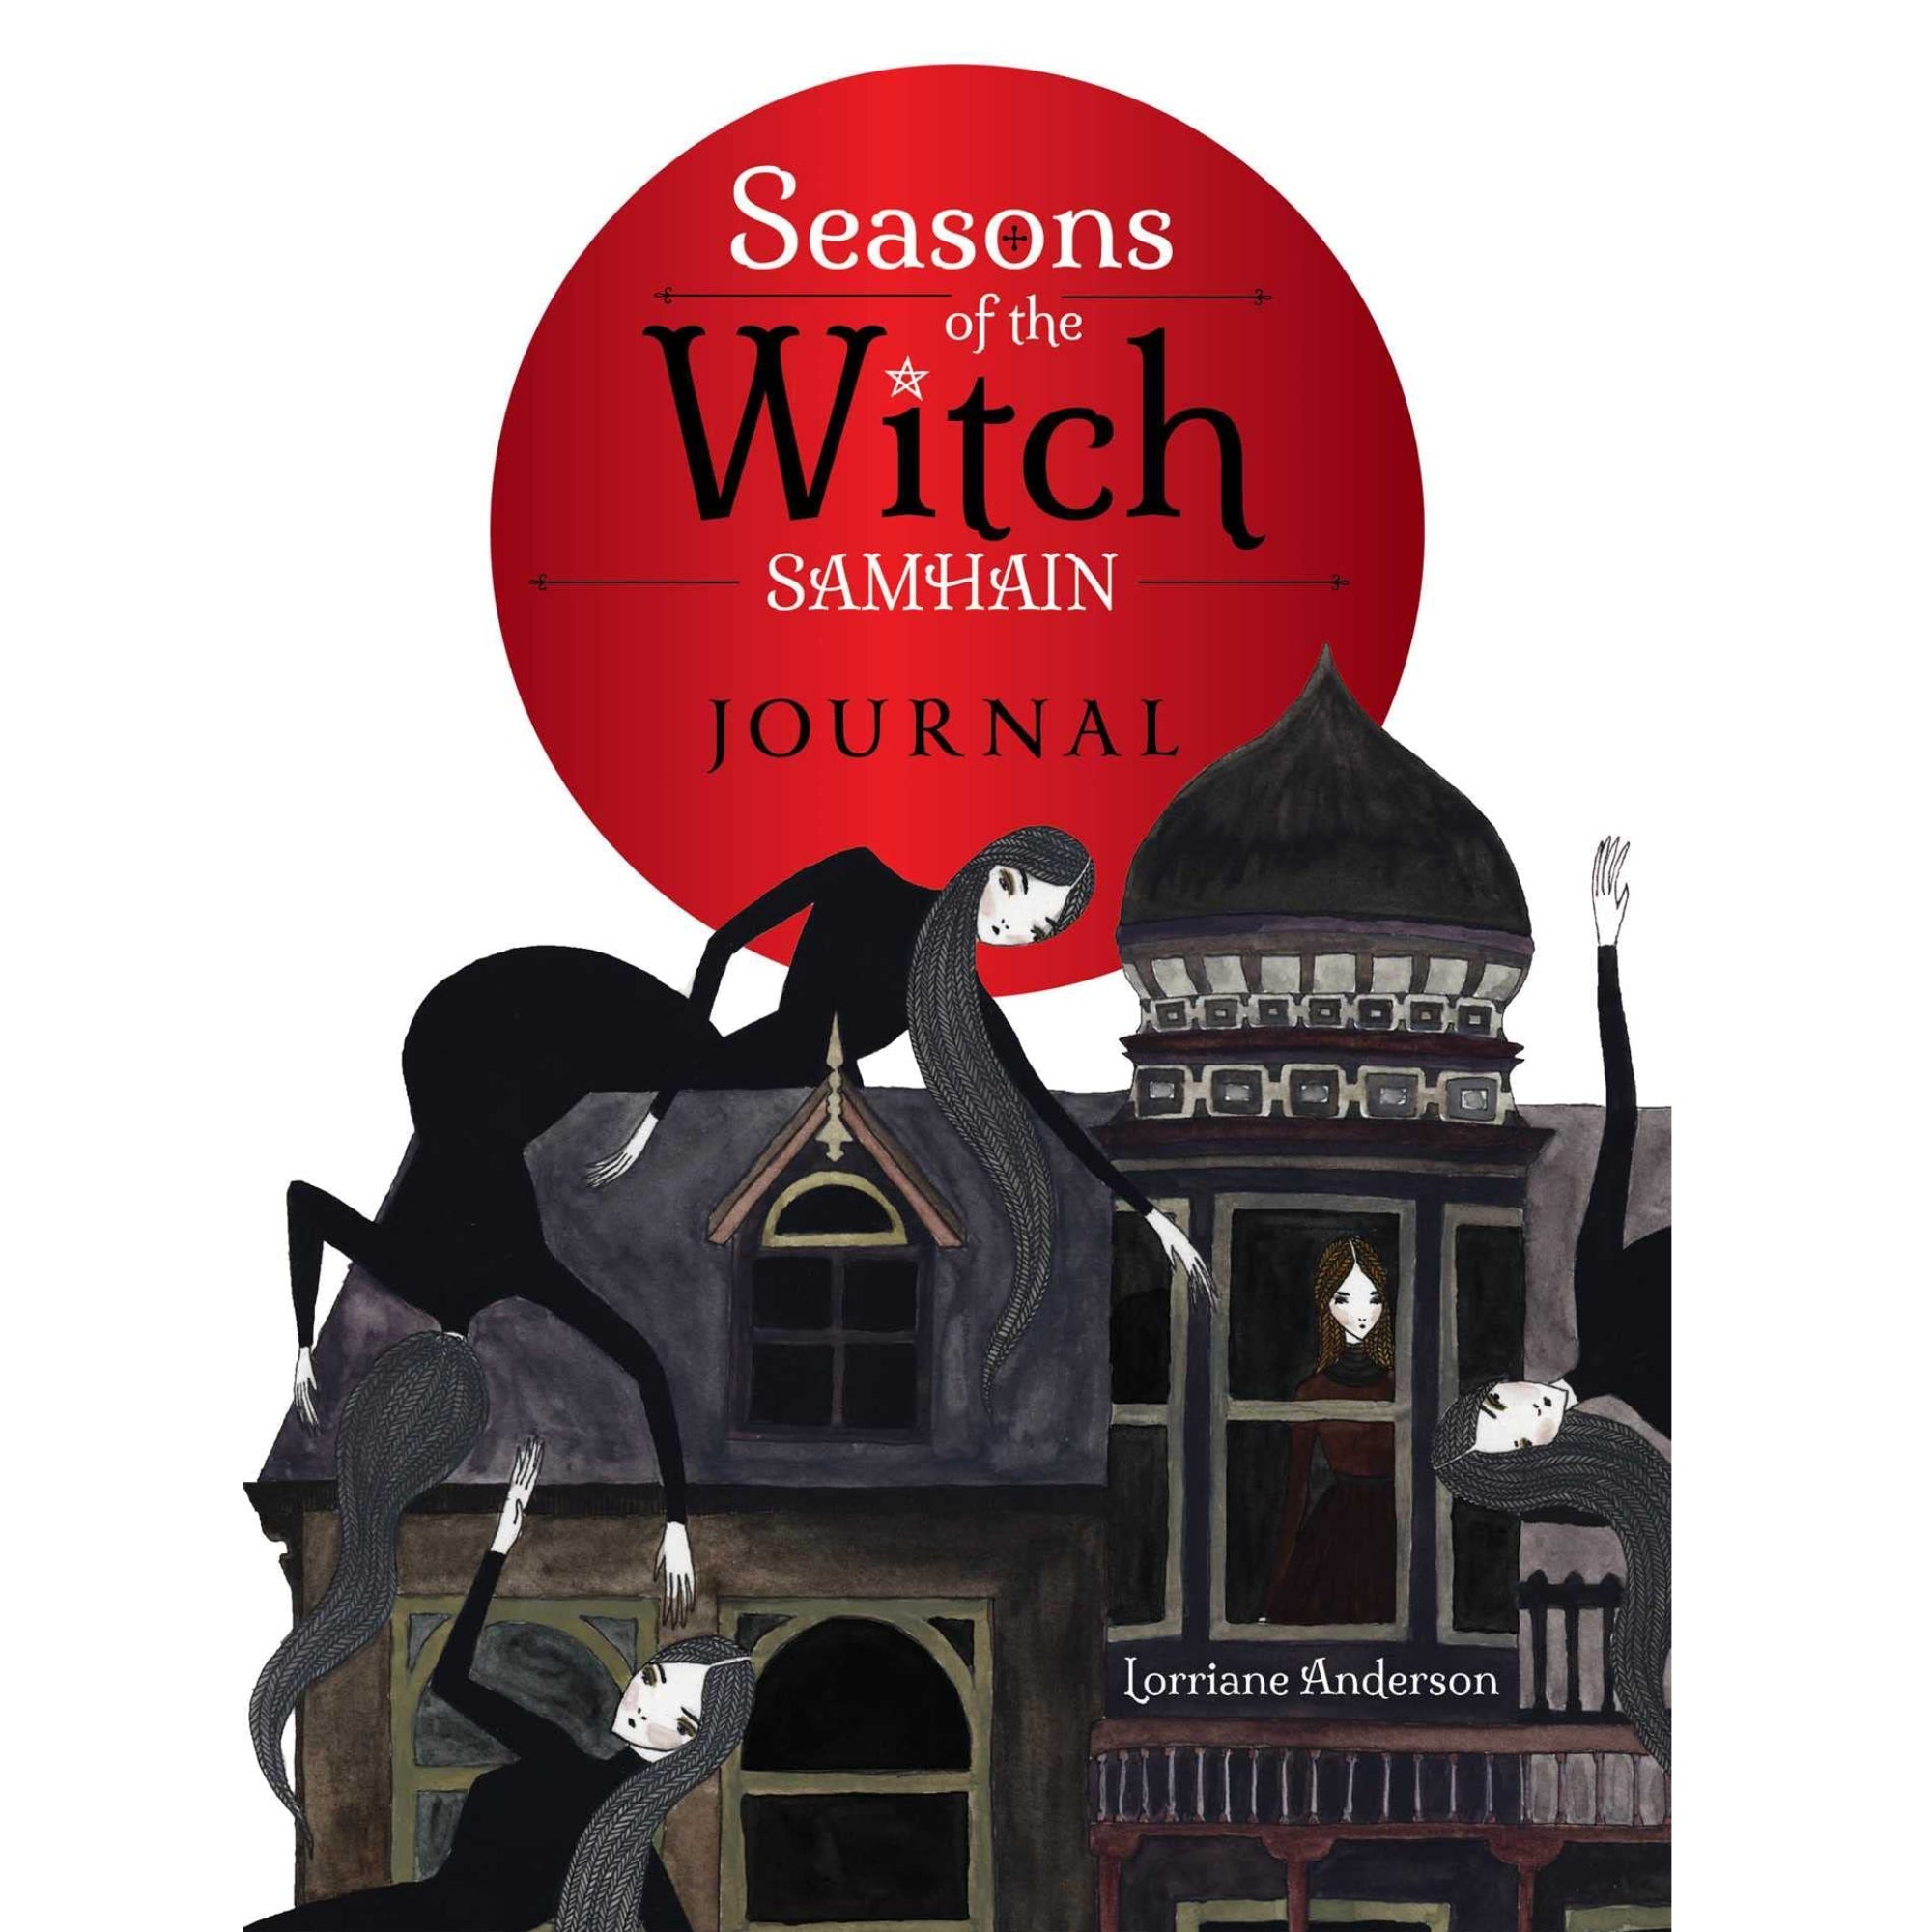 Seasons of the Witch Samhain Journal - 13 Moons